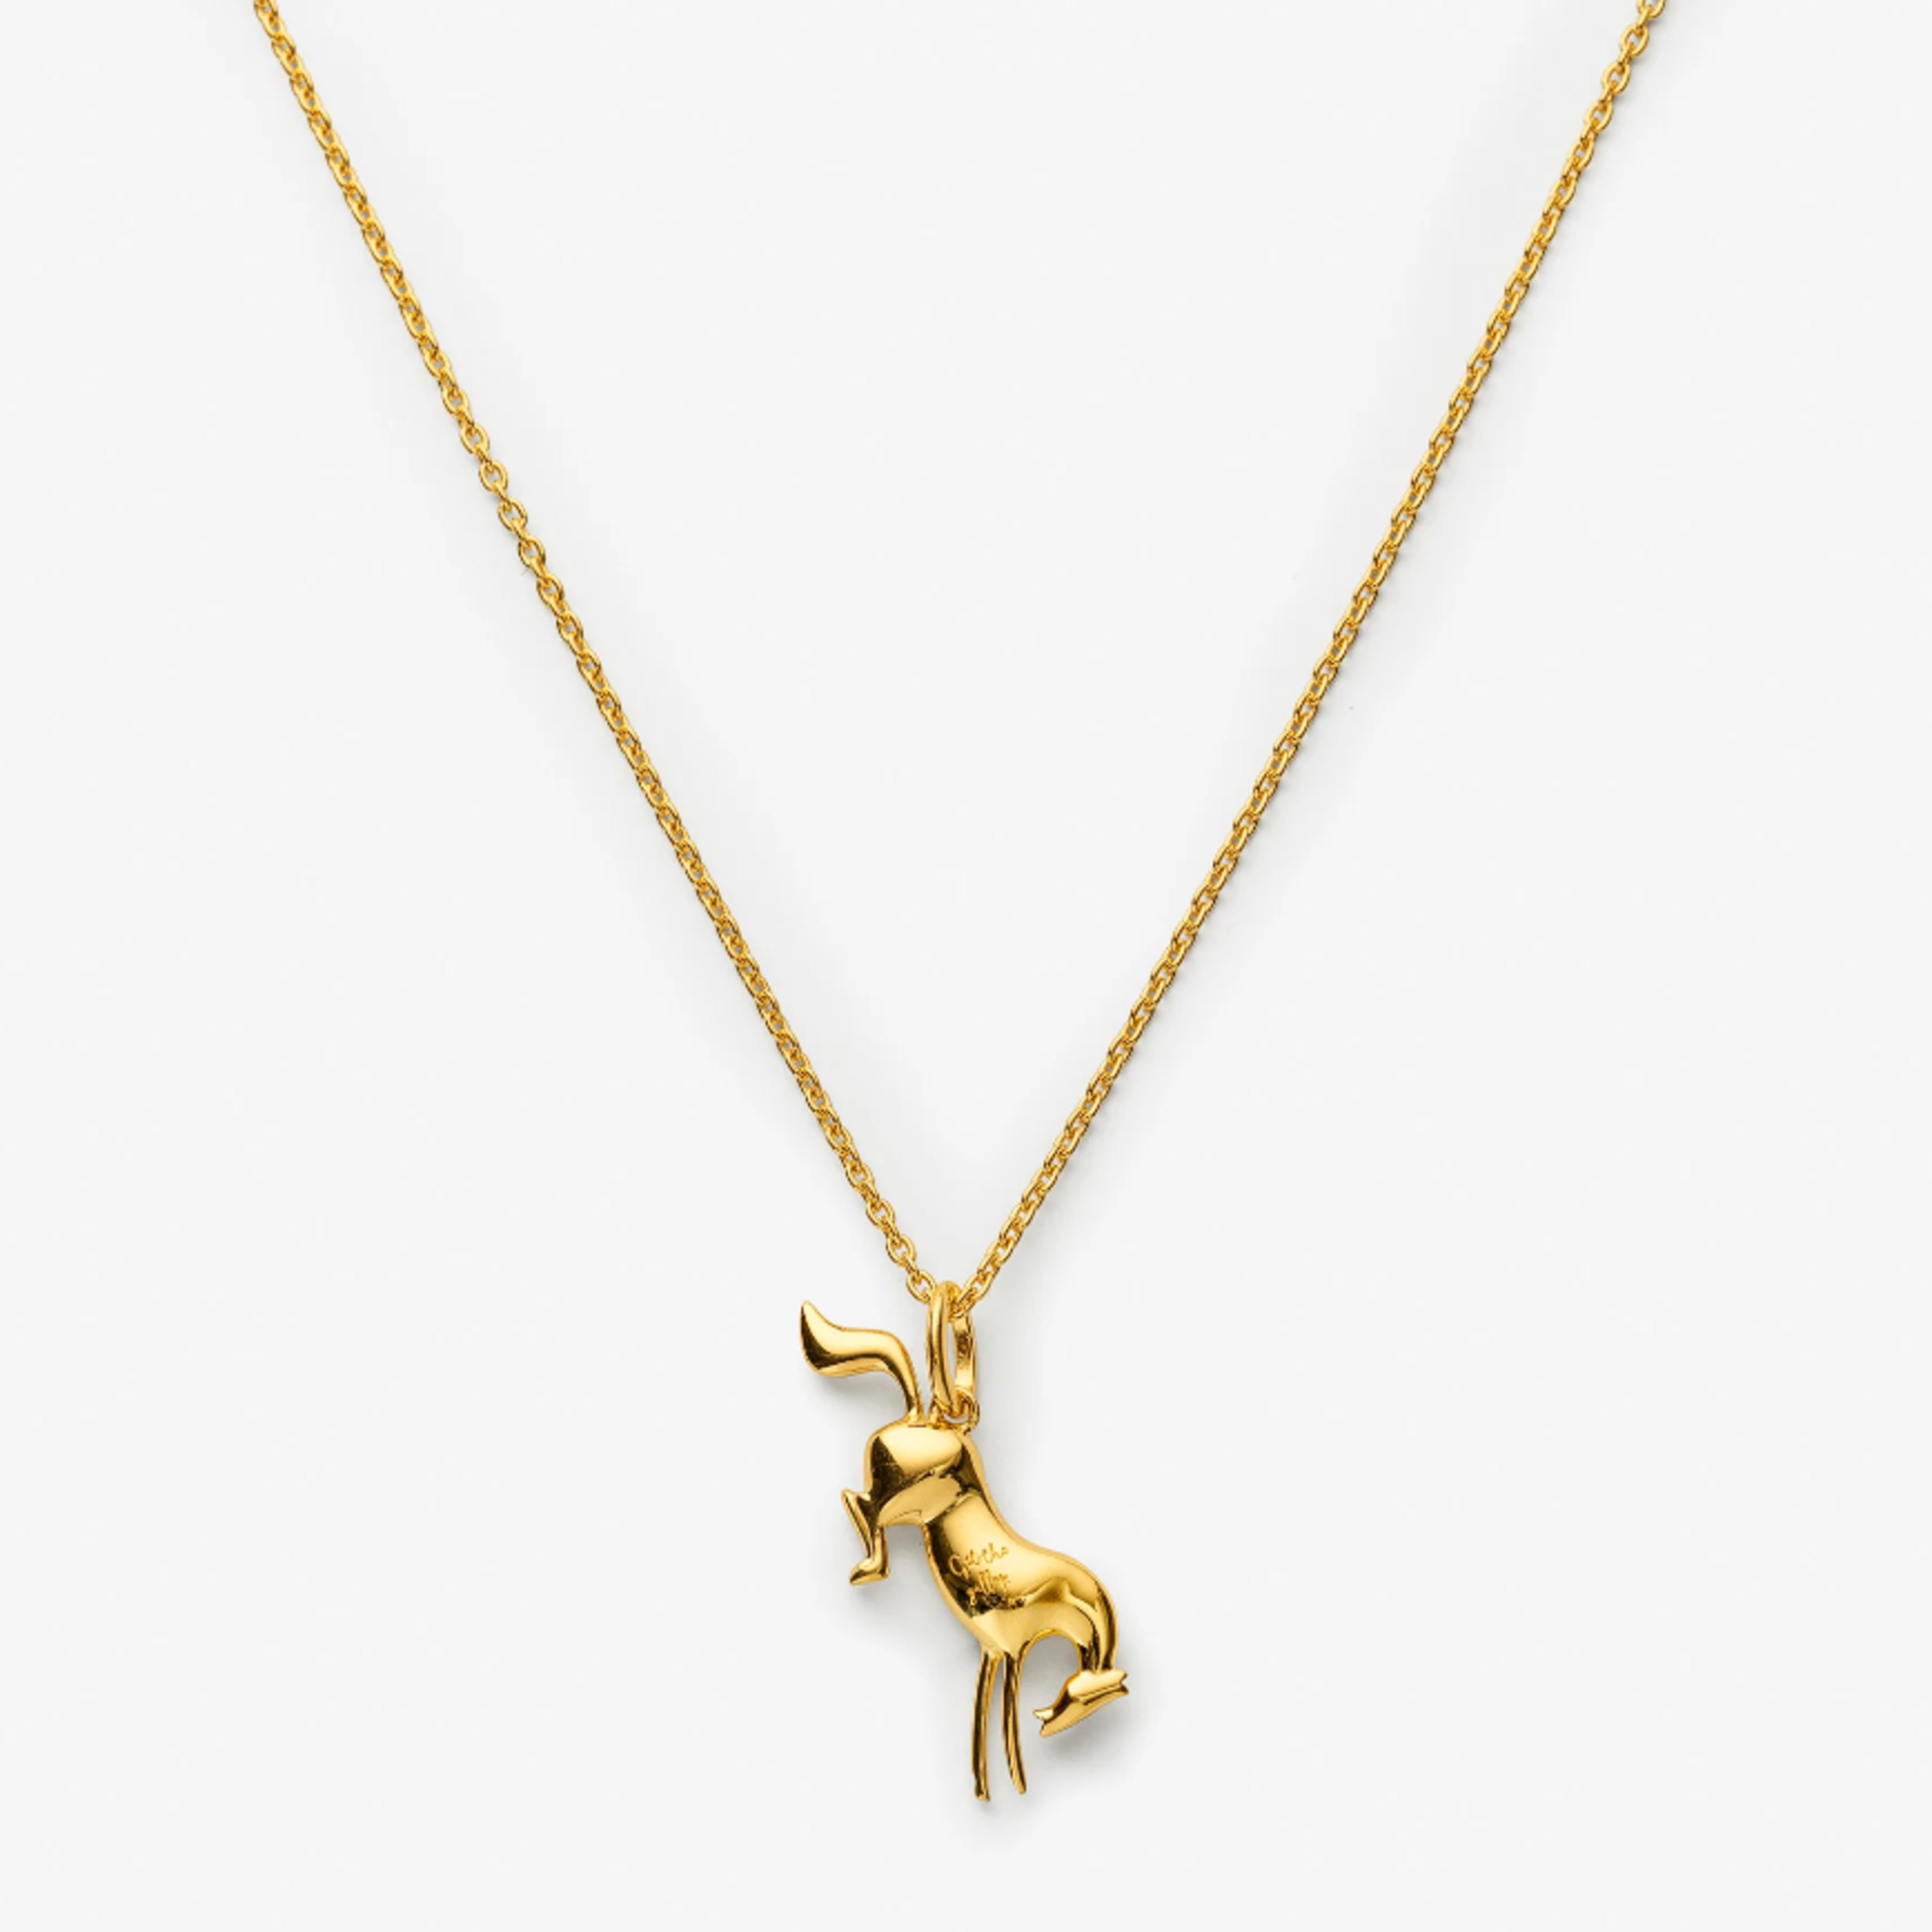 Get the Gallop Bucking Horse Necklace